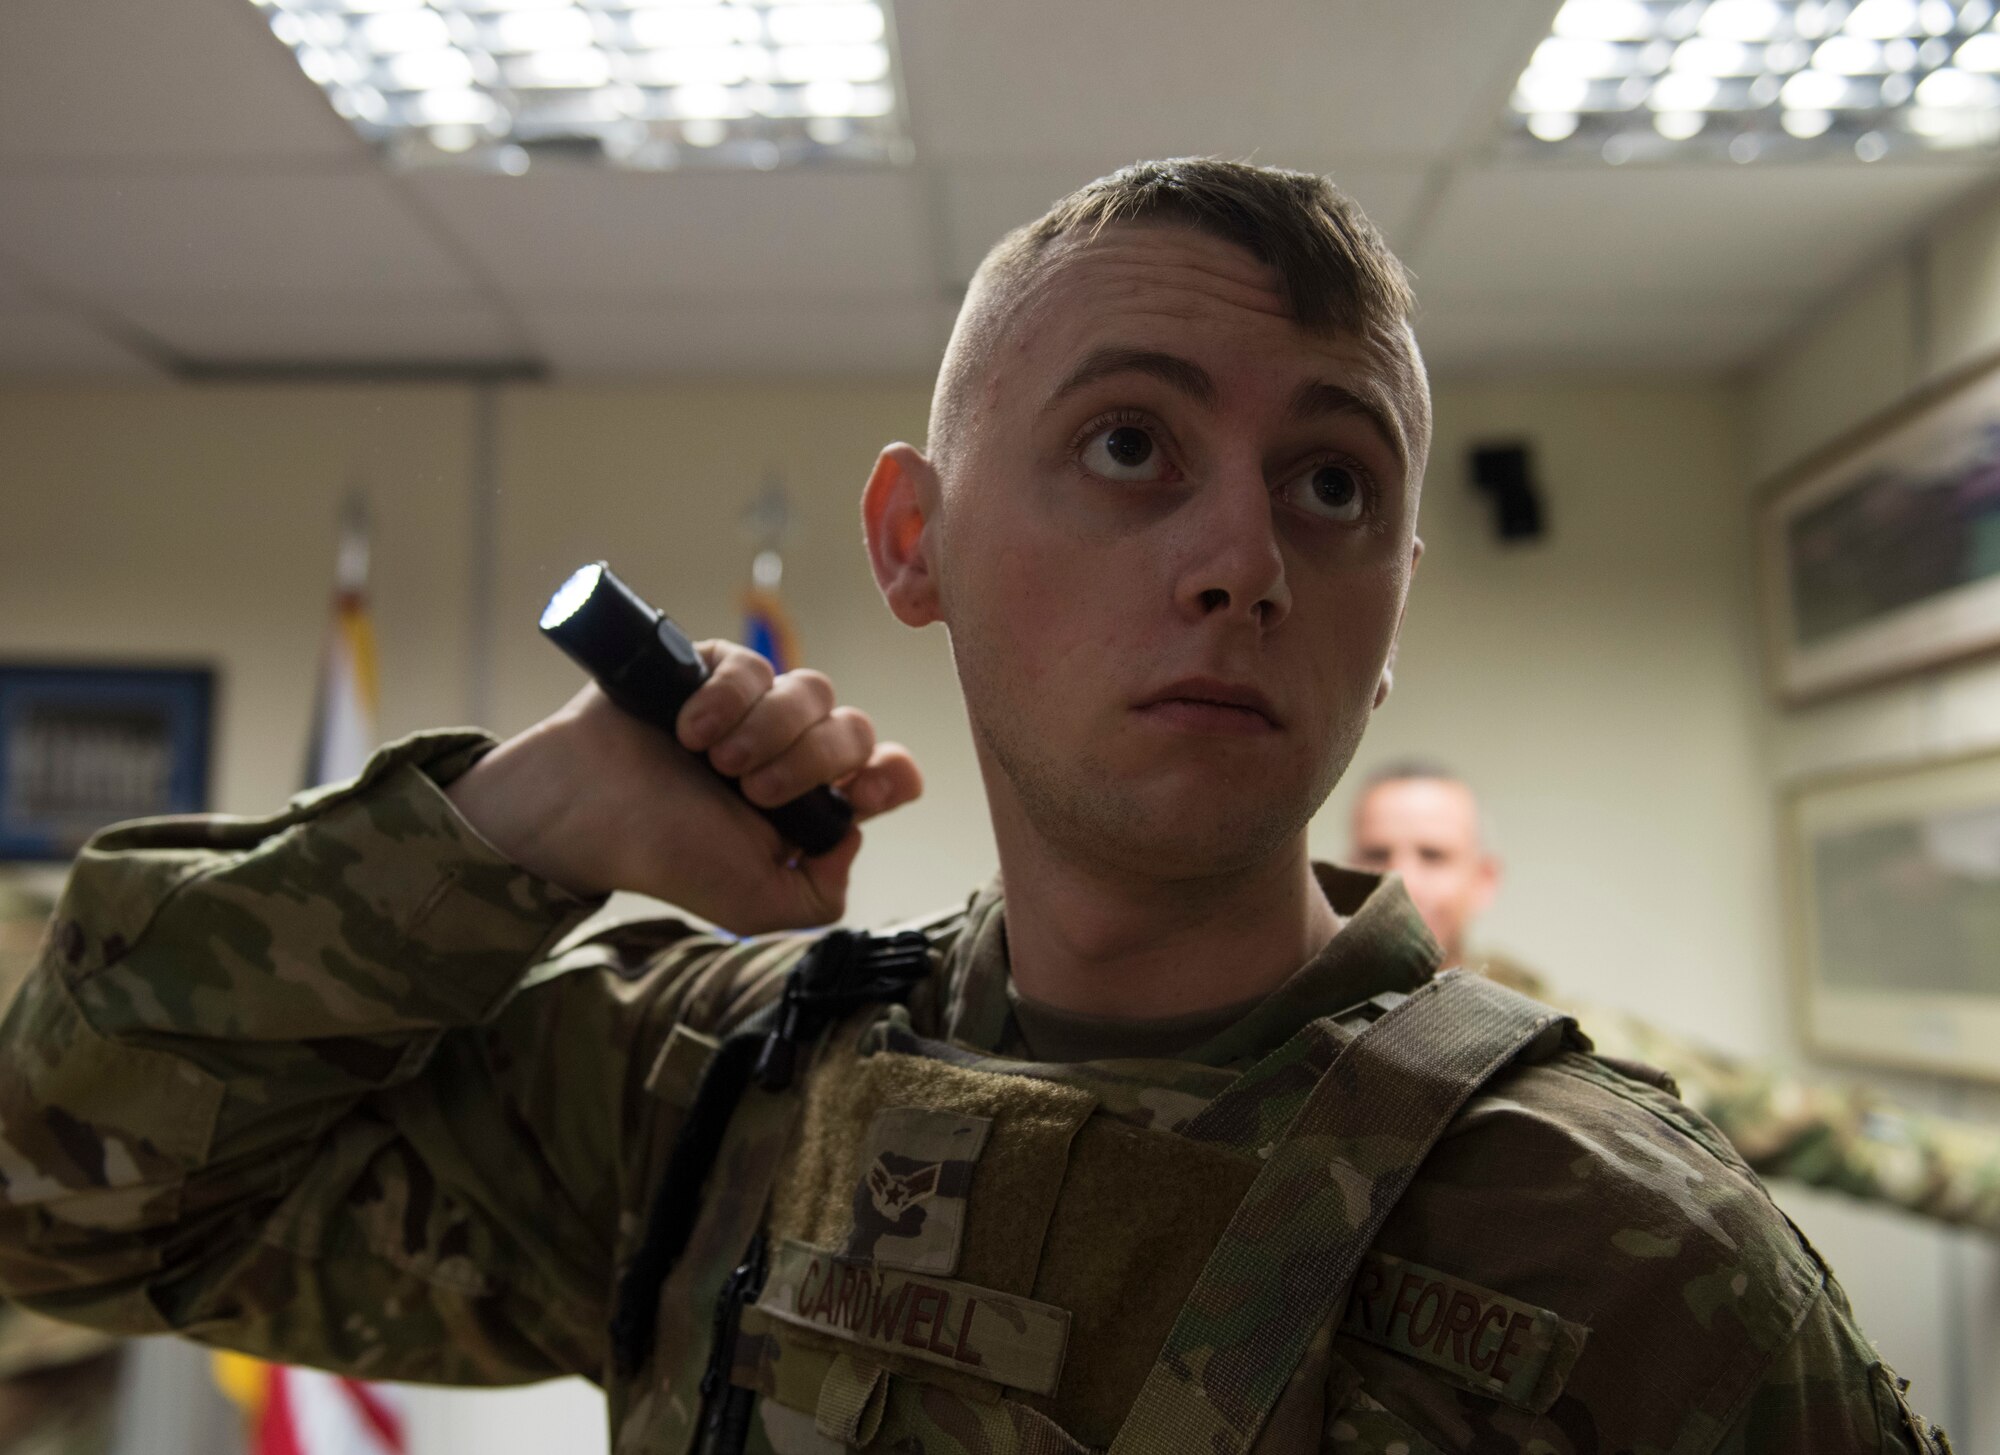 U.S. Air Force Airman 1st Class Christian Cardwell, 422nd Security Forces Squadron response force member, shines a flashlight during a recall exercise at RAF Croughton, England, November 21, 2019. Quarterly recall exercises are a form of readiness for defenders to always be prepared to respond at a moment’s notice. (U.S. Air Force photo by Airman 1st Class Jennifer Zima)